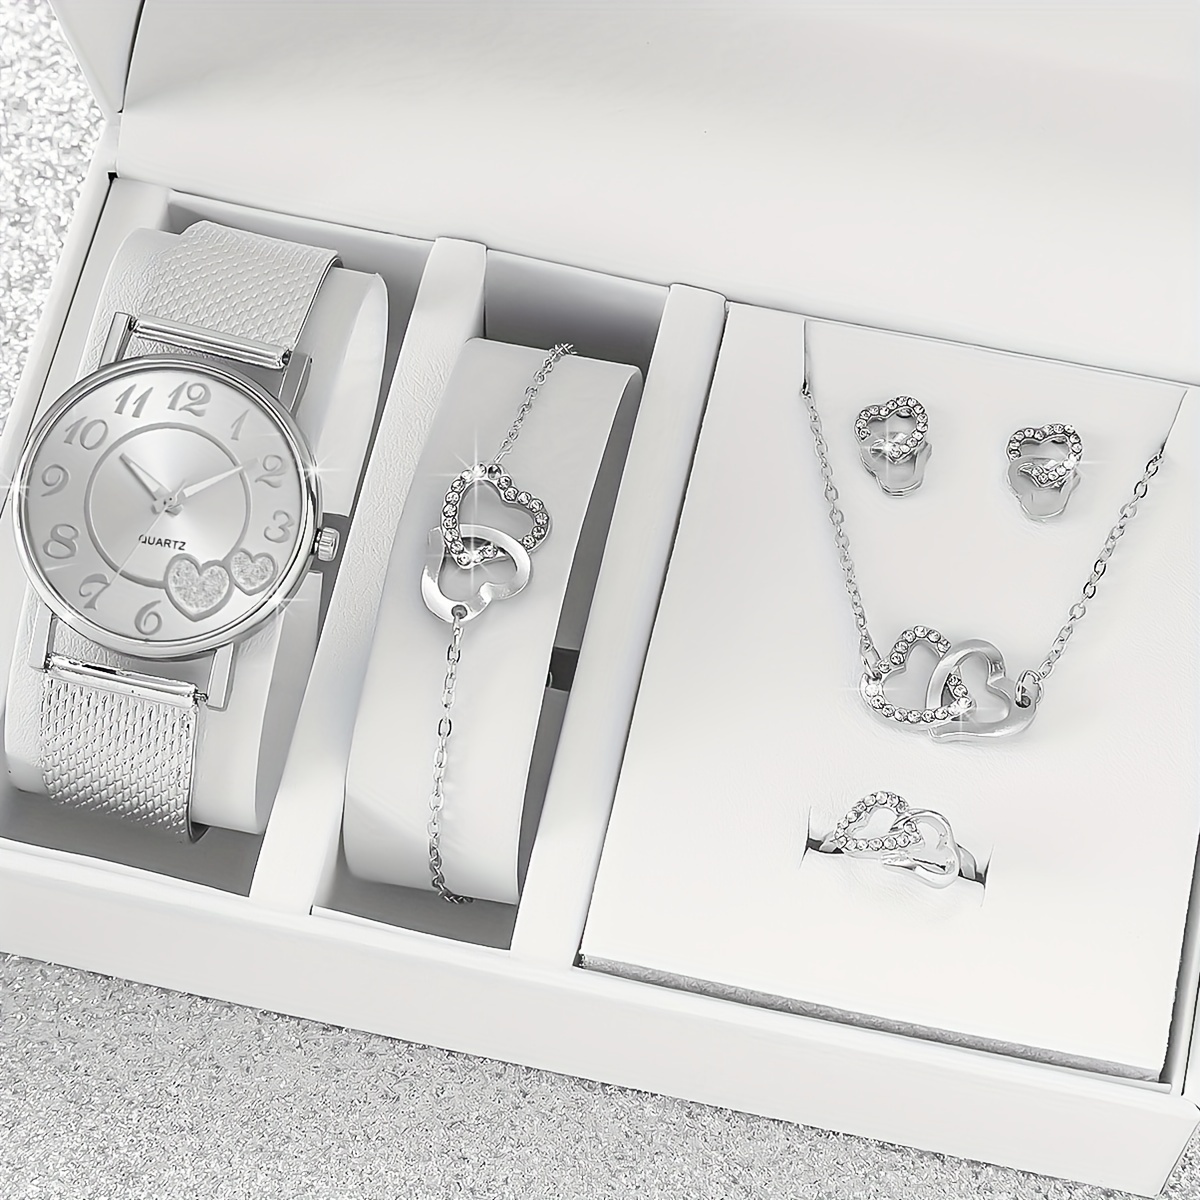 

Women's Elegant Watch And Jewelry Set, 6-piece, Quartz Movement, Stainless Steel Mesh Band, Heart Design, With Necklace, Bracelet, Earrings, And Ring, Gift Box Included